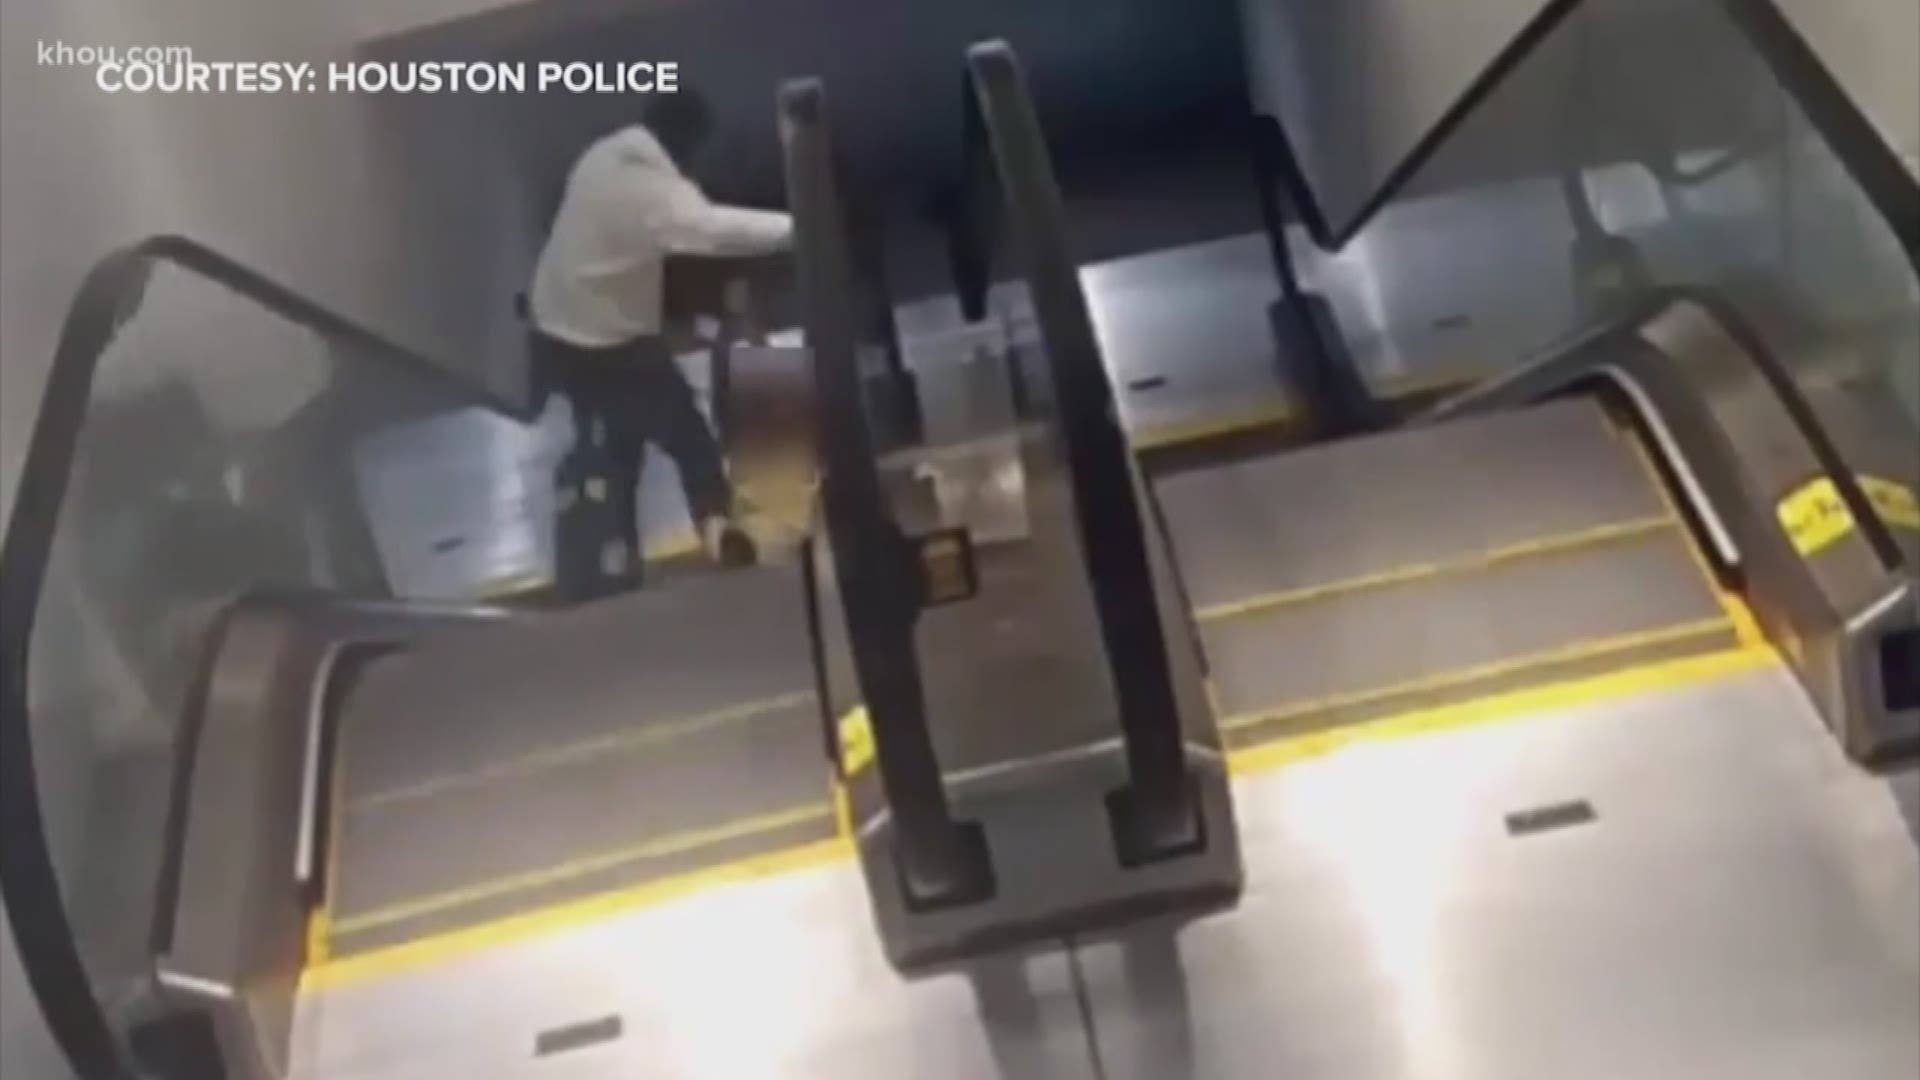 Surveillance video shows the moment a thief sneaks up on a woman on an escalator in The Galleria and robs her.